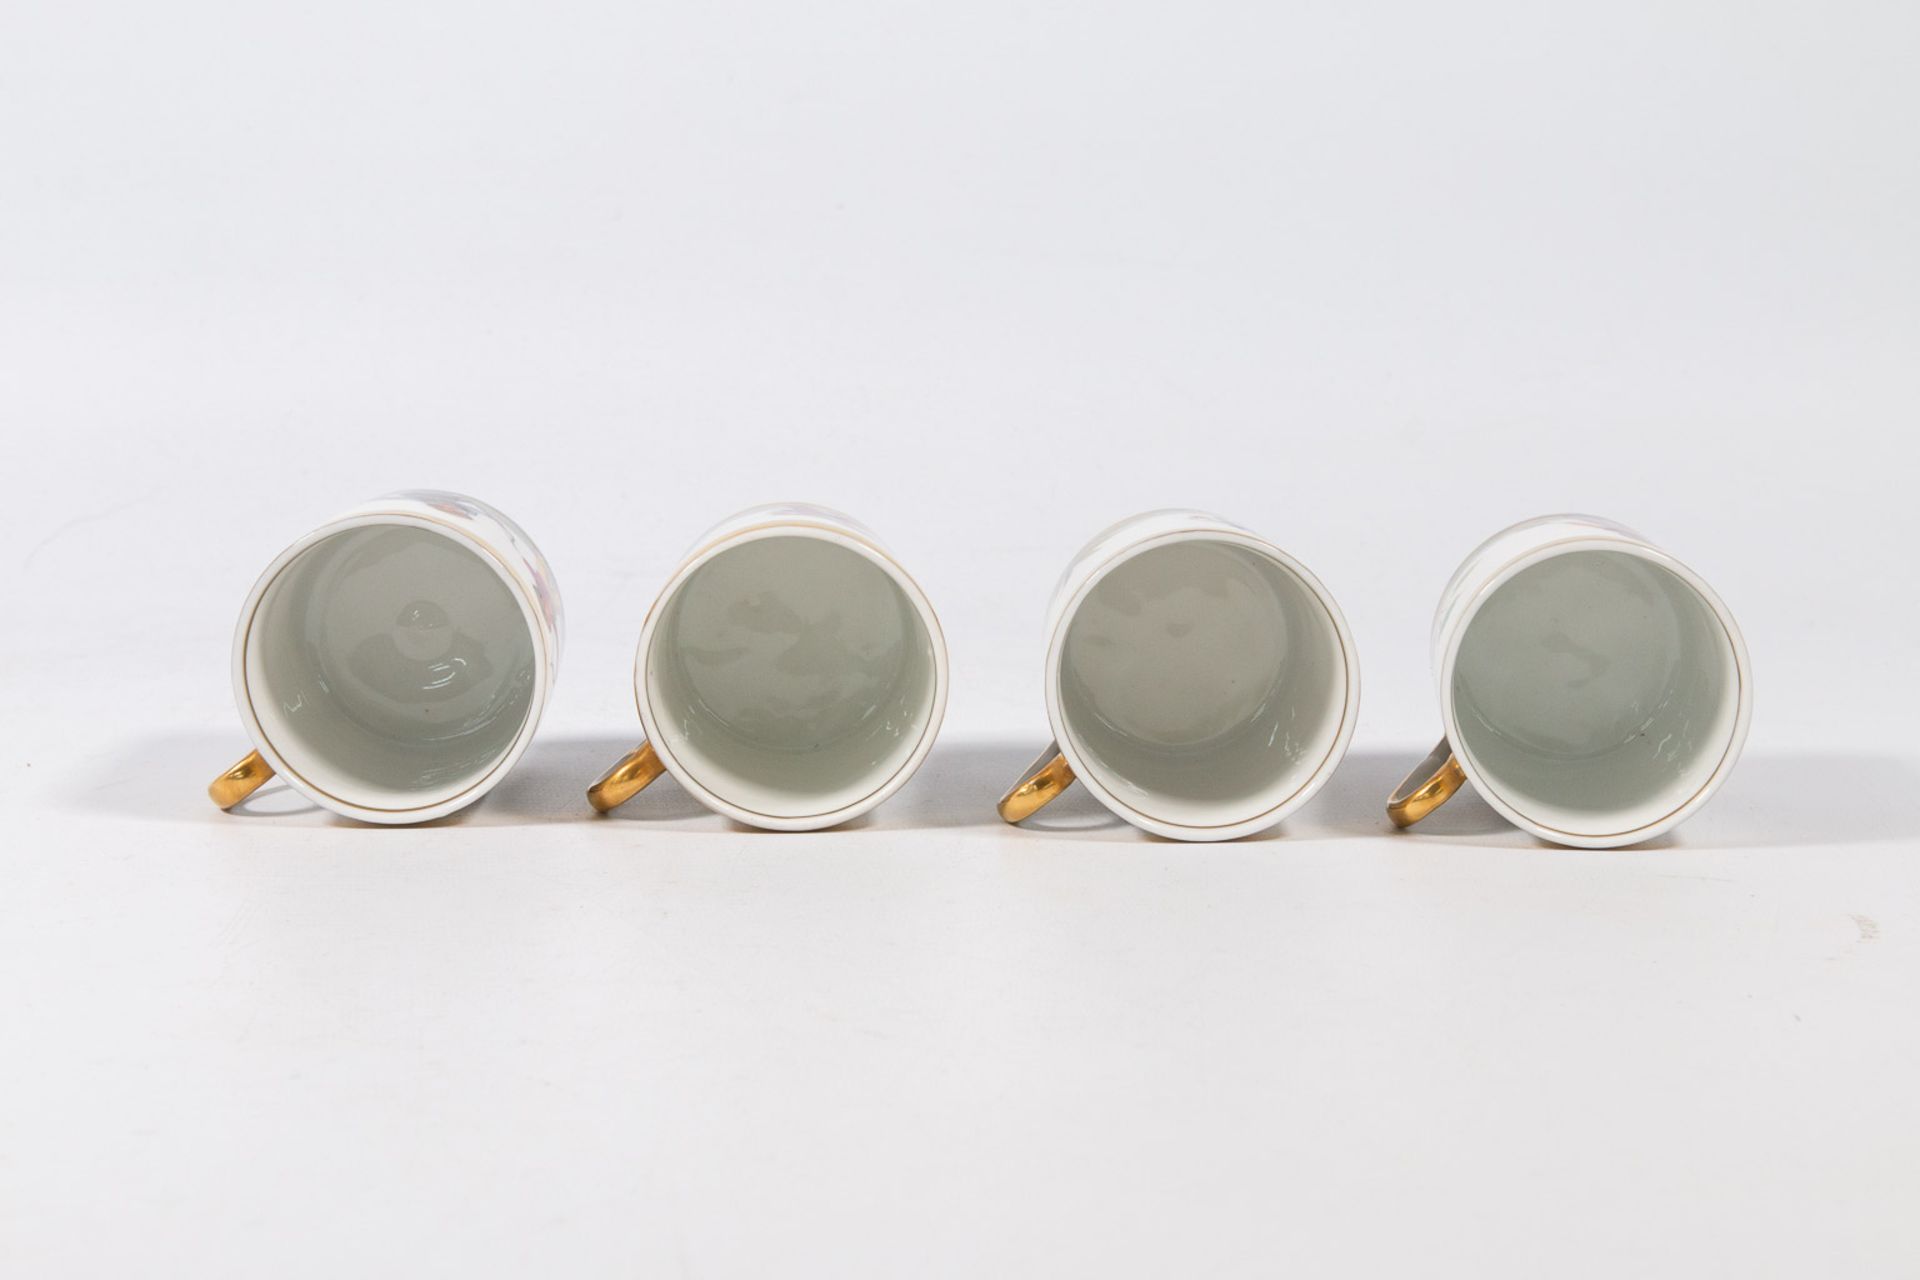 A Complete 'Vieux Bruxelles' coffee and tea service made of porcelain. - Image 8 of 53